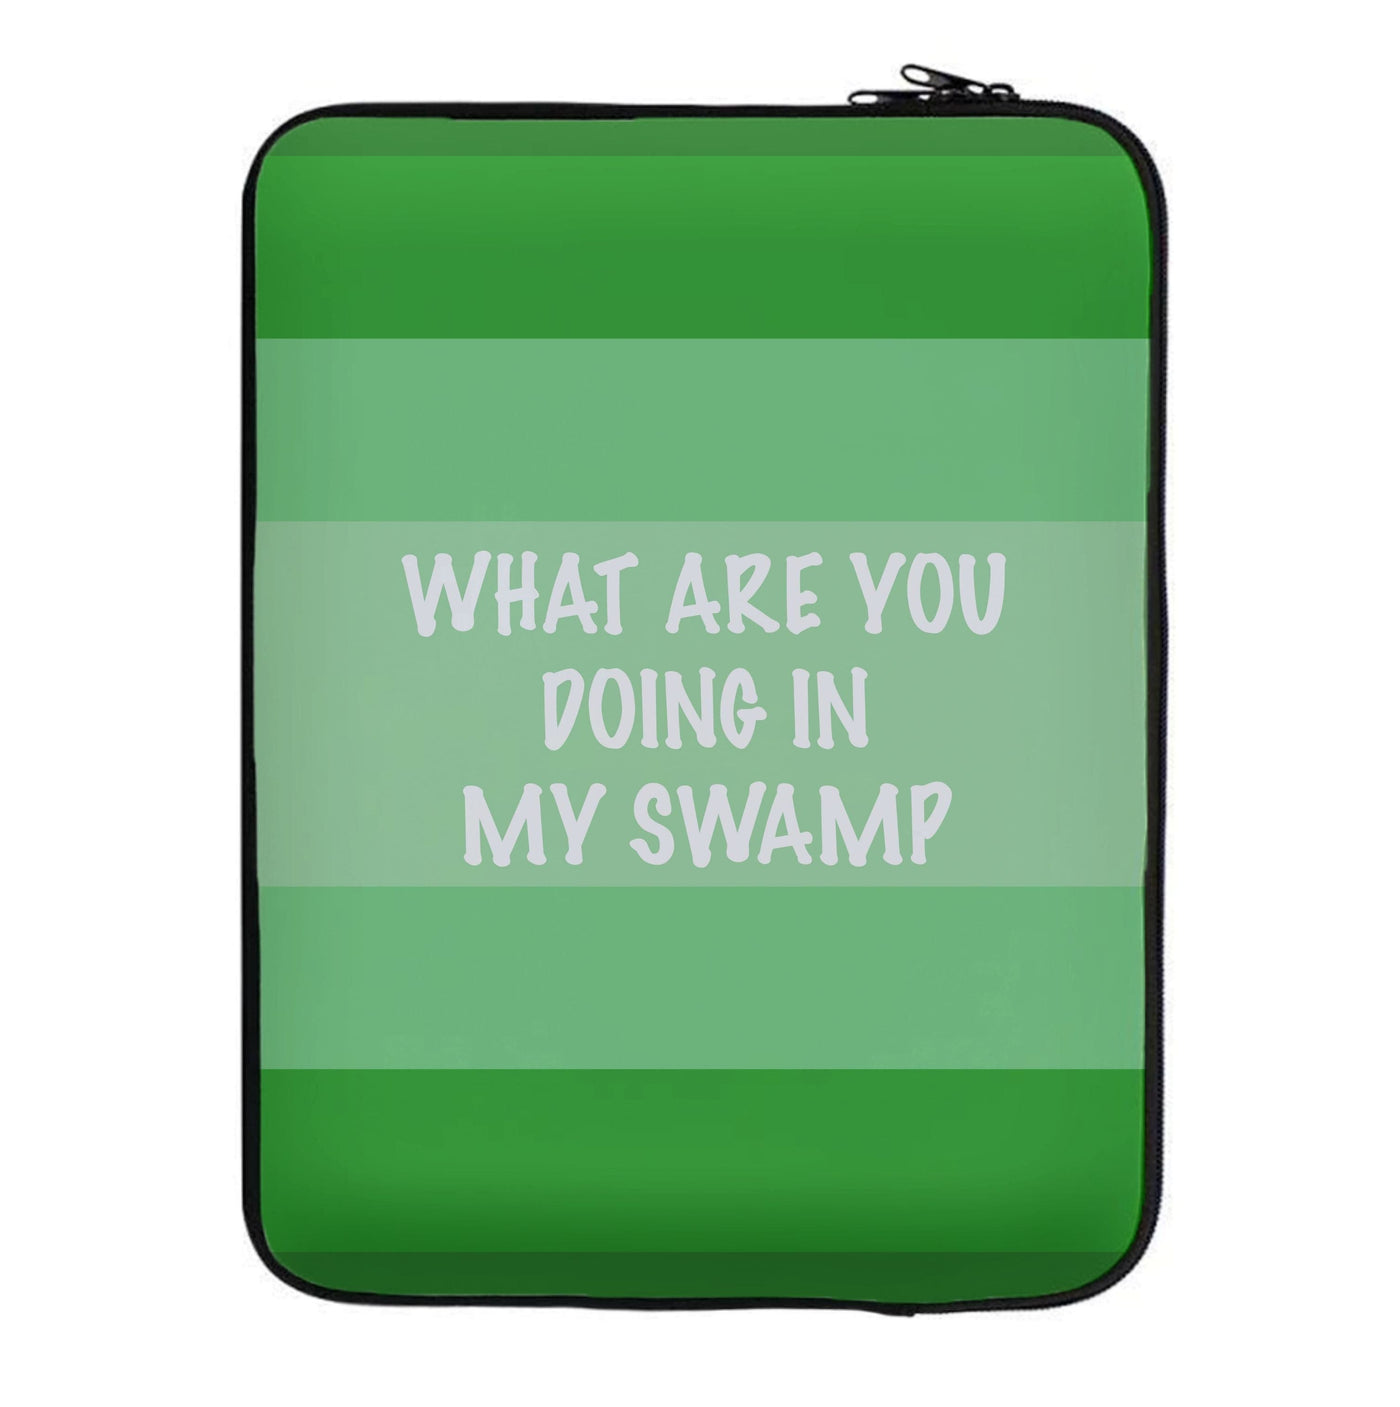 What Are You Doing In My Swamp - Shrek Laptop Sleeve